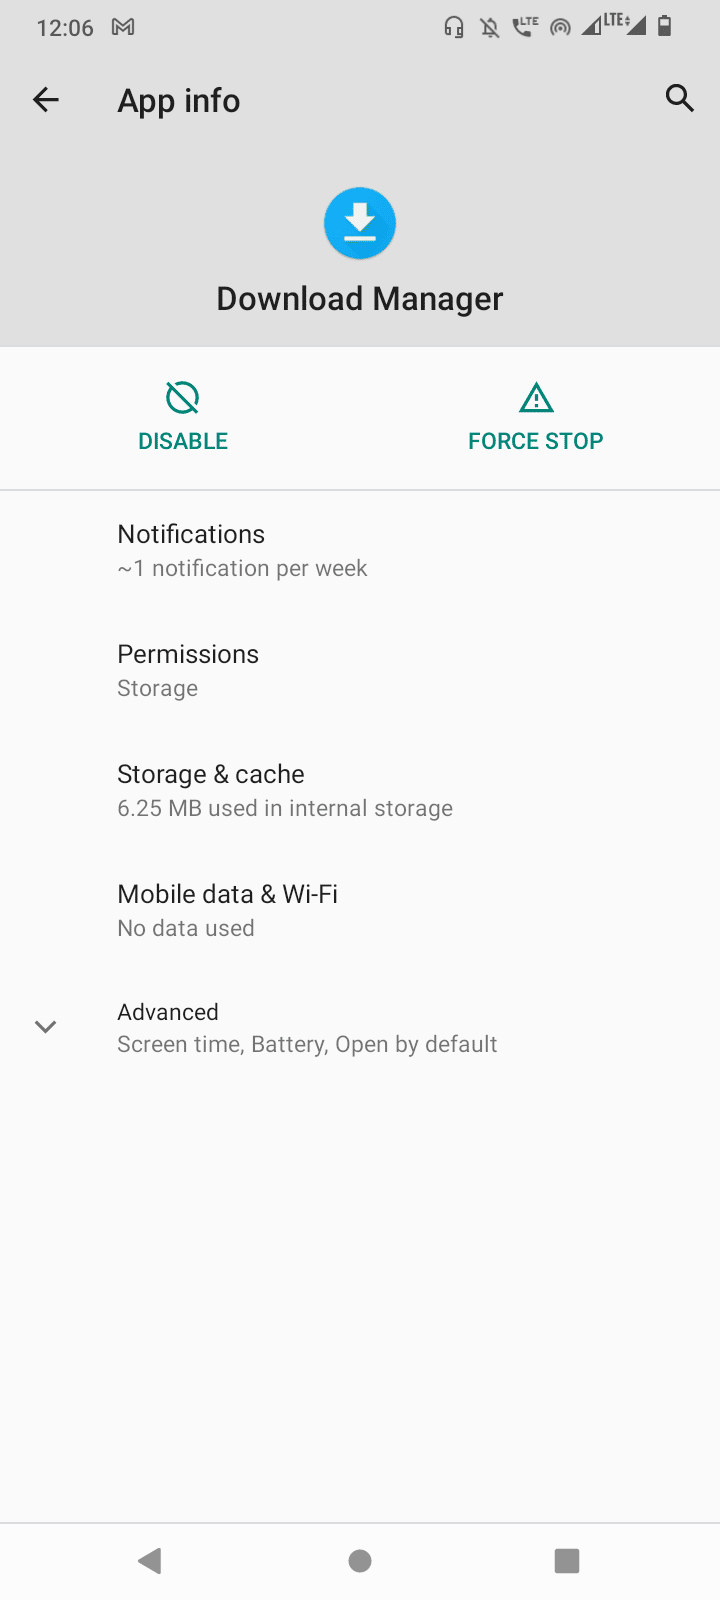 download manager app details. Ways to Fix Currently Unable to Download on Android